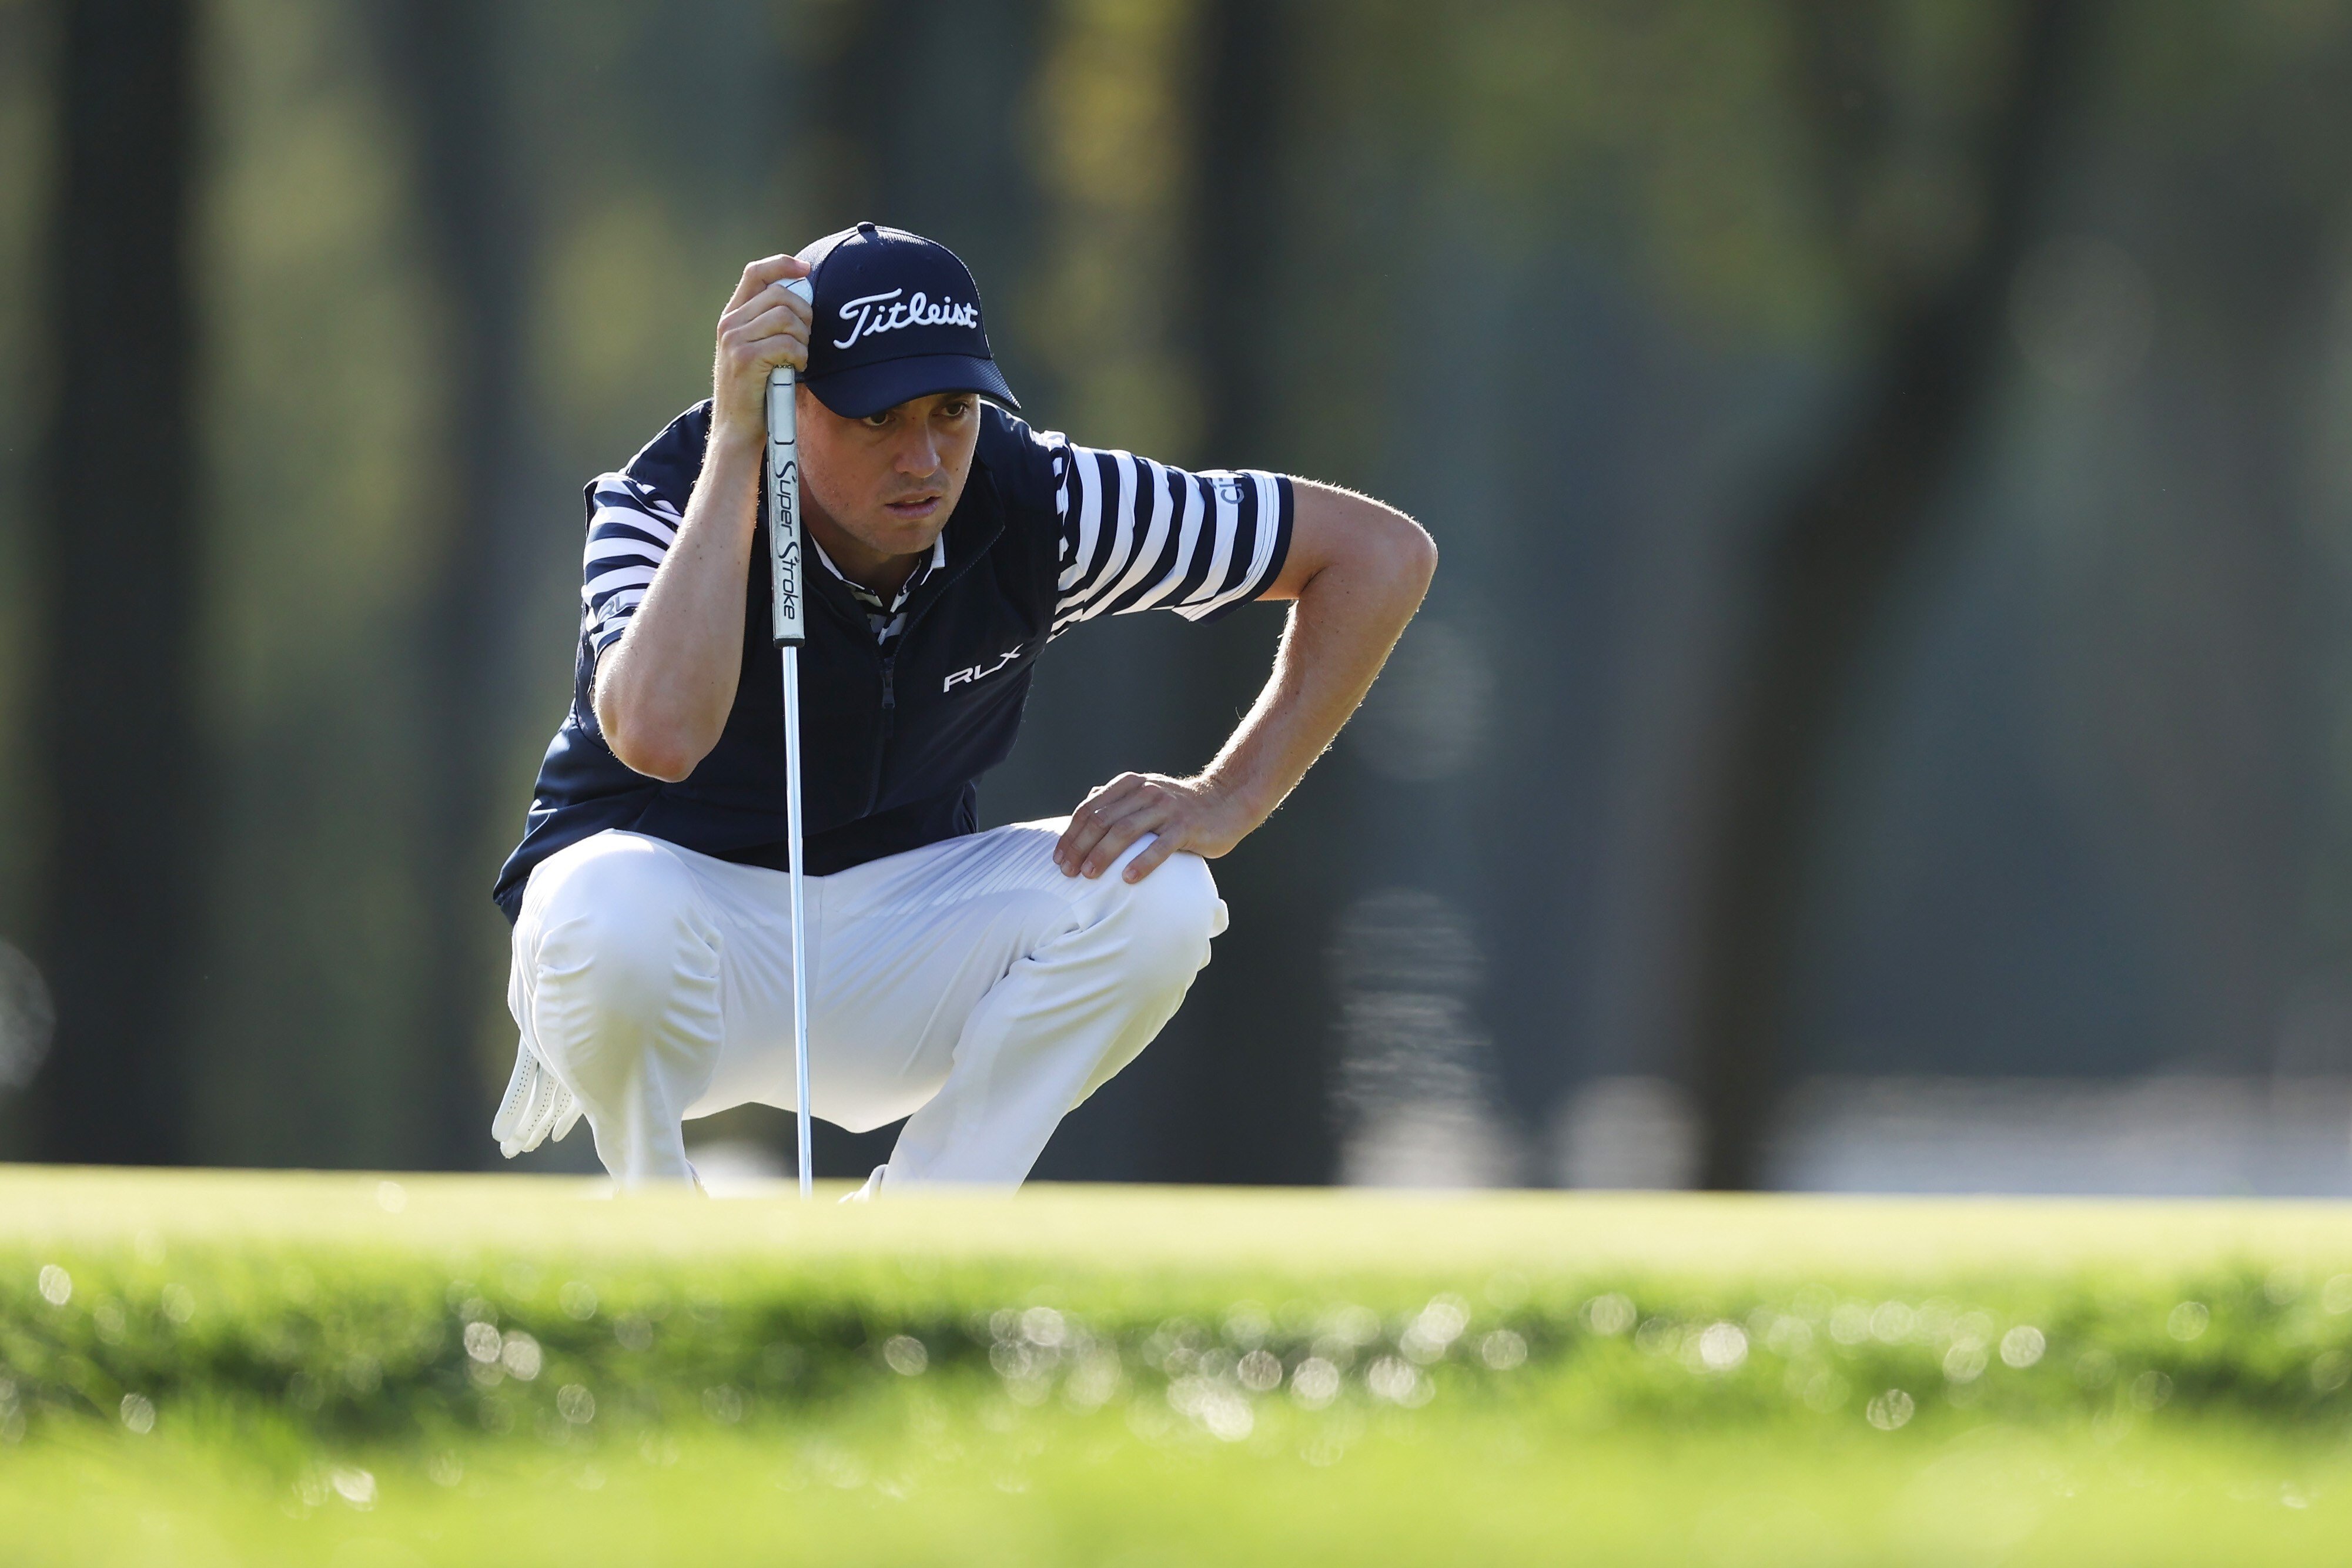 Justin Thomas lines up a putt on the second hole during the second round of the 120th US Open at Winged Foot Golf Club in Mamaroneck, New York. Photo: AFP